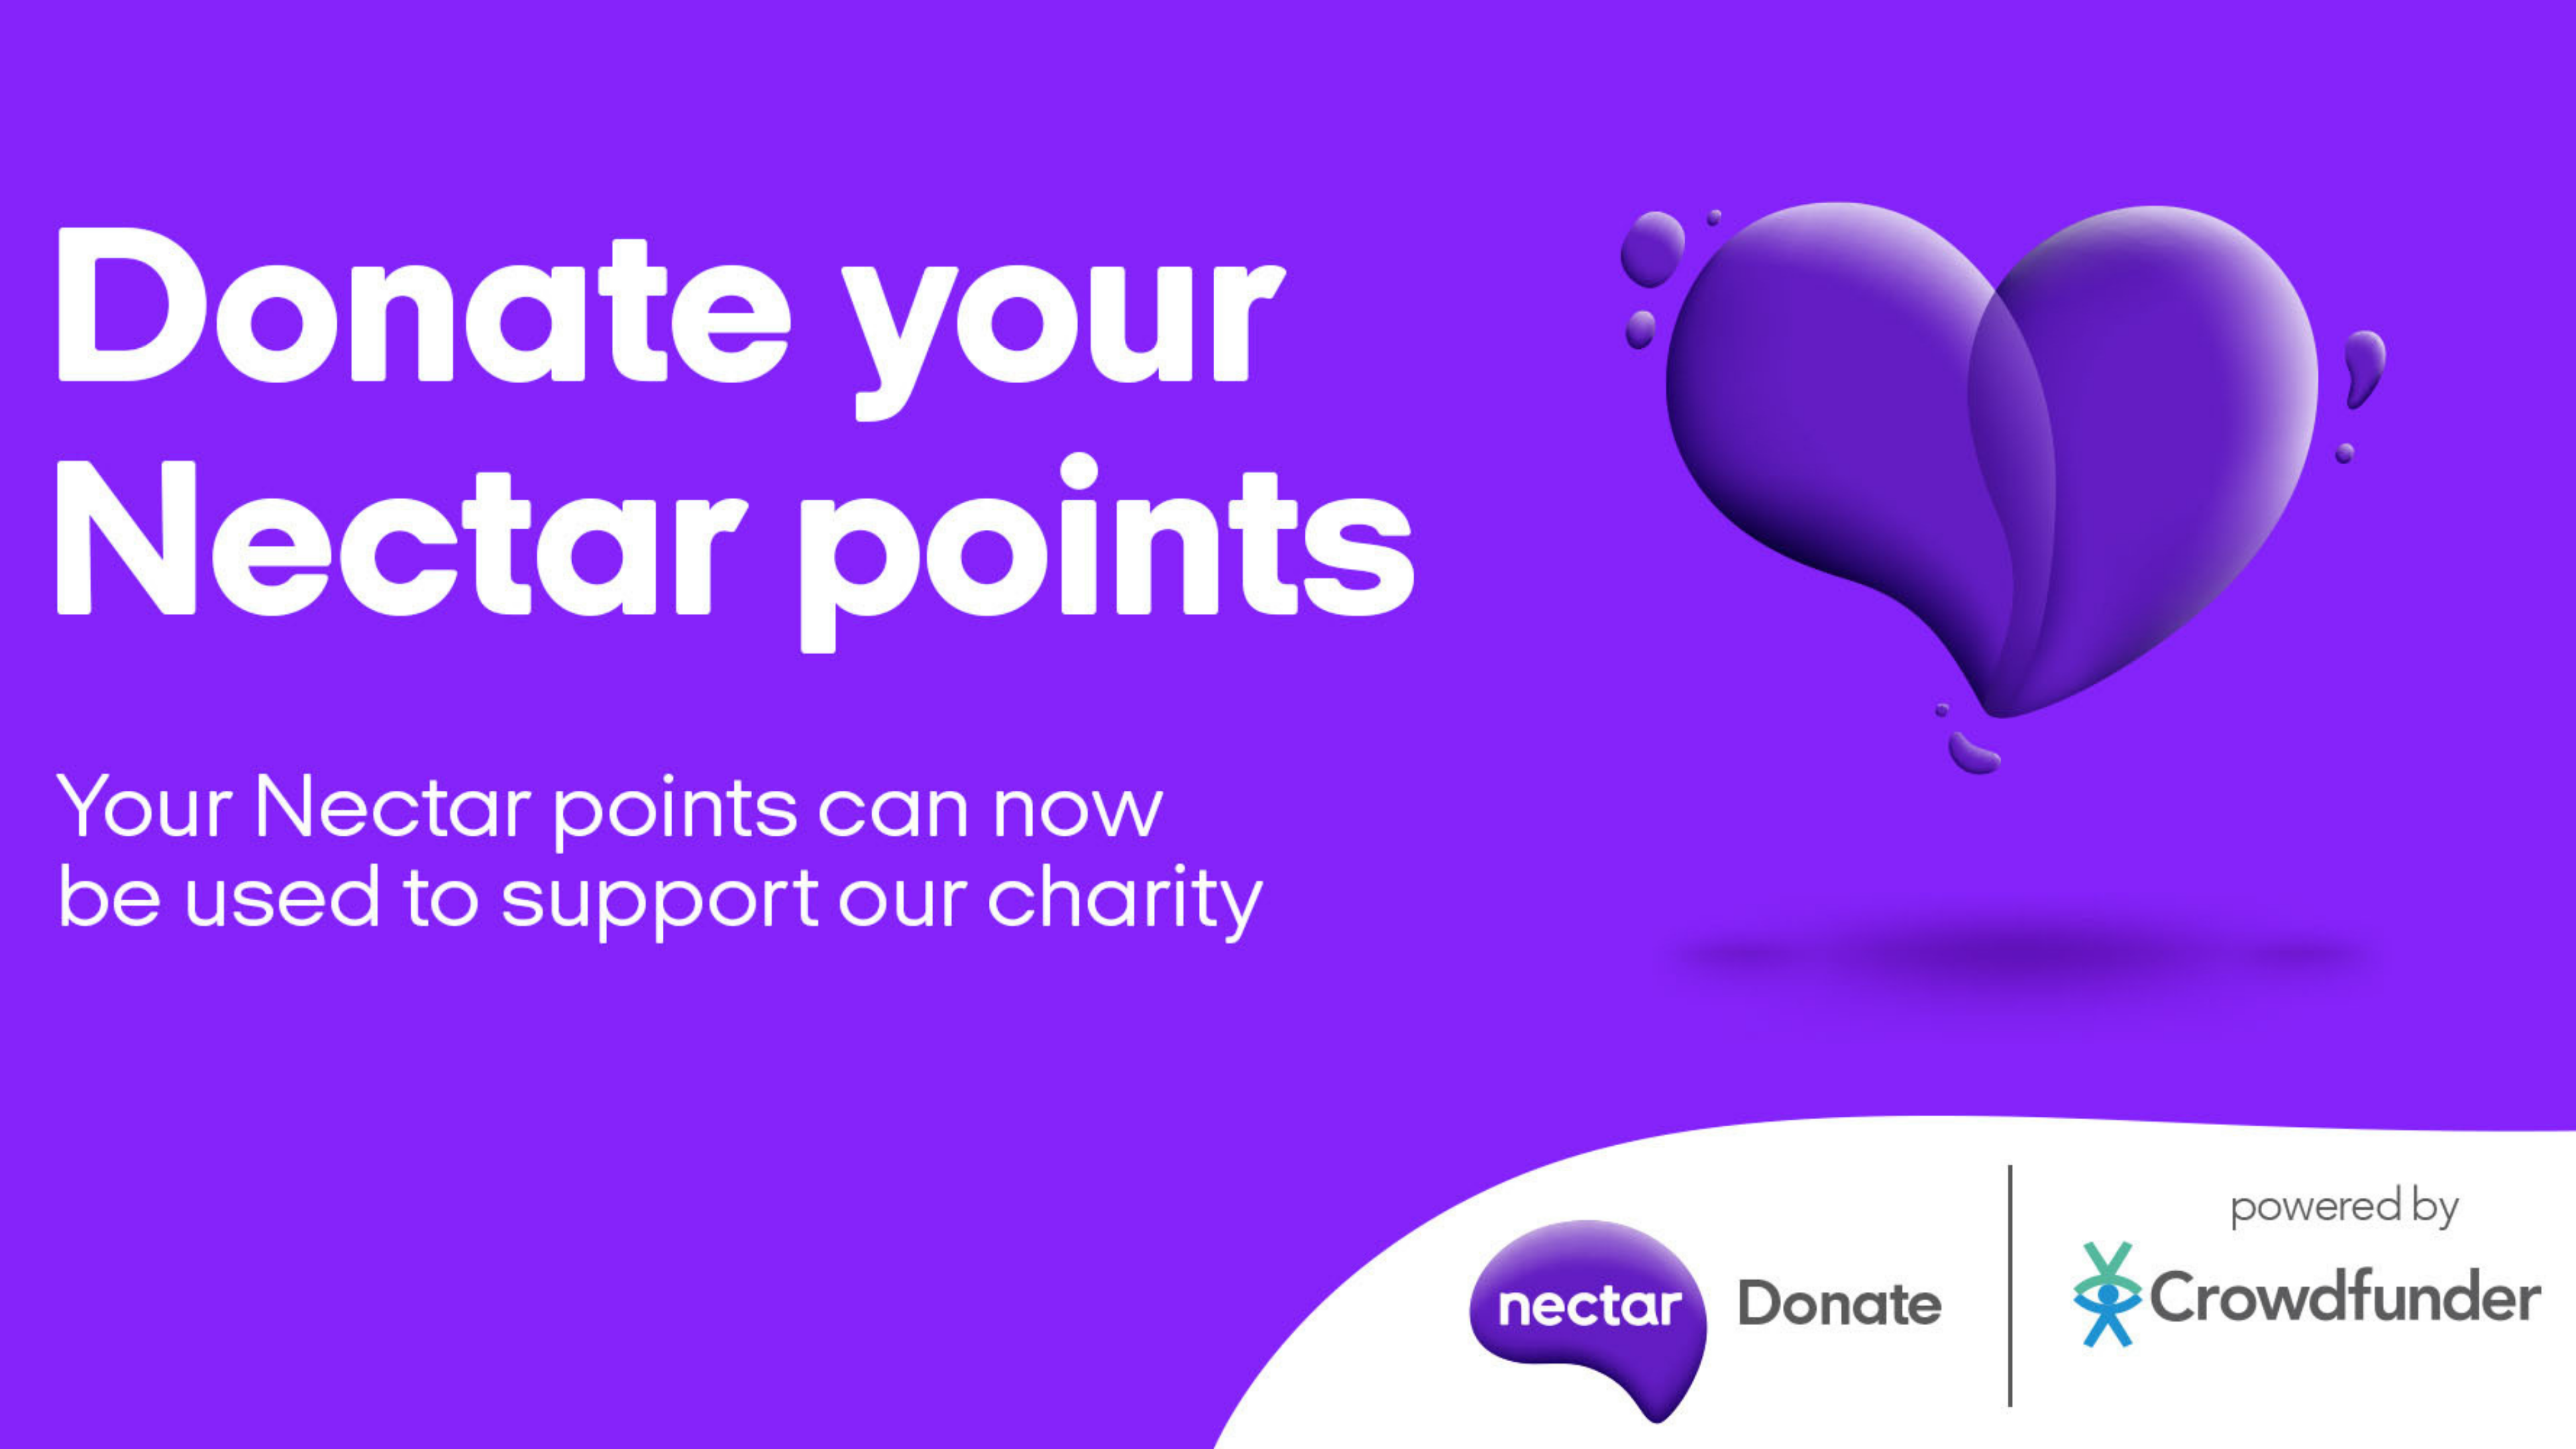 Donate your Nectar points